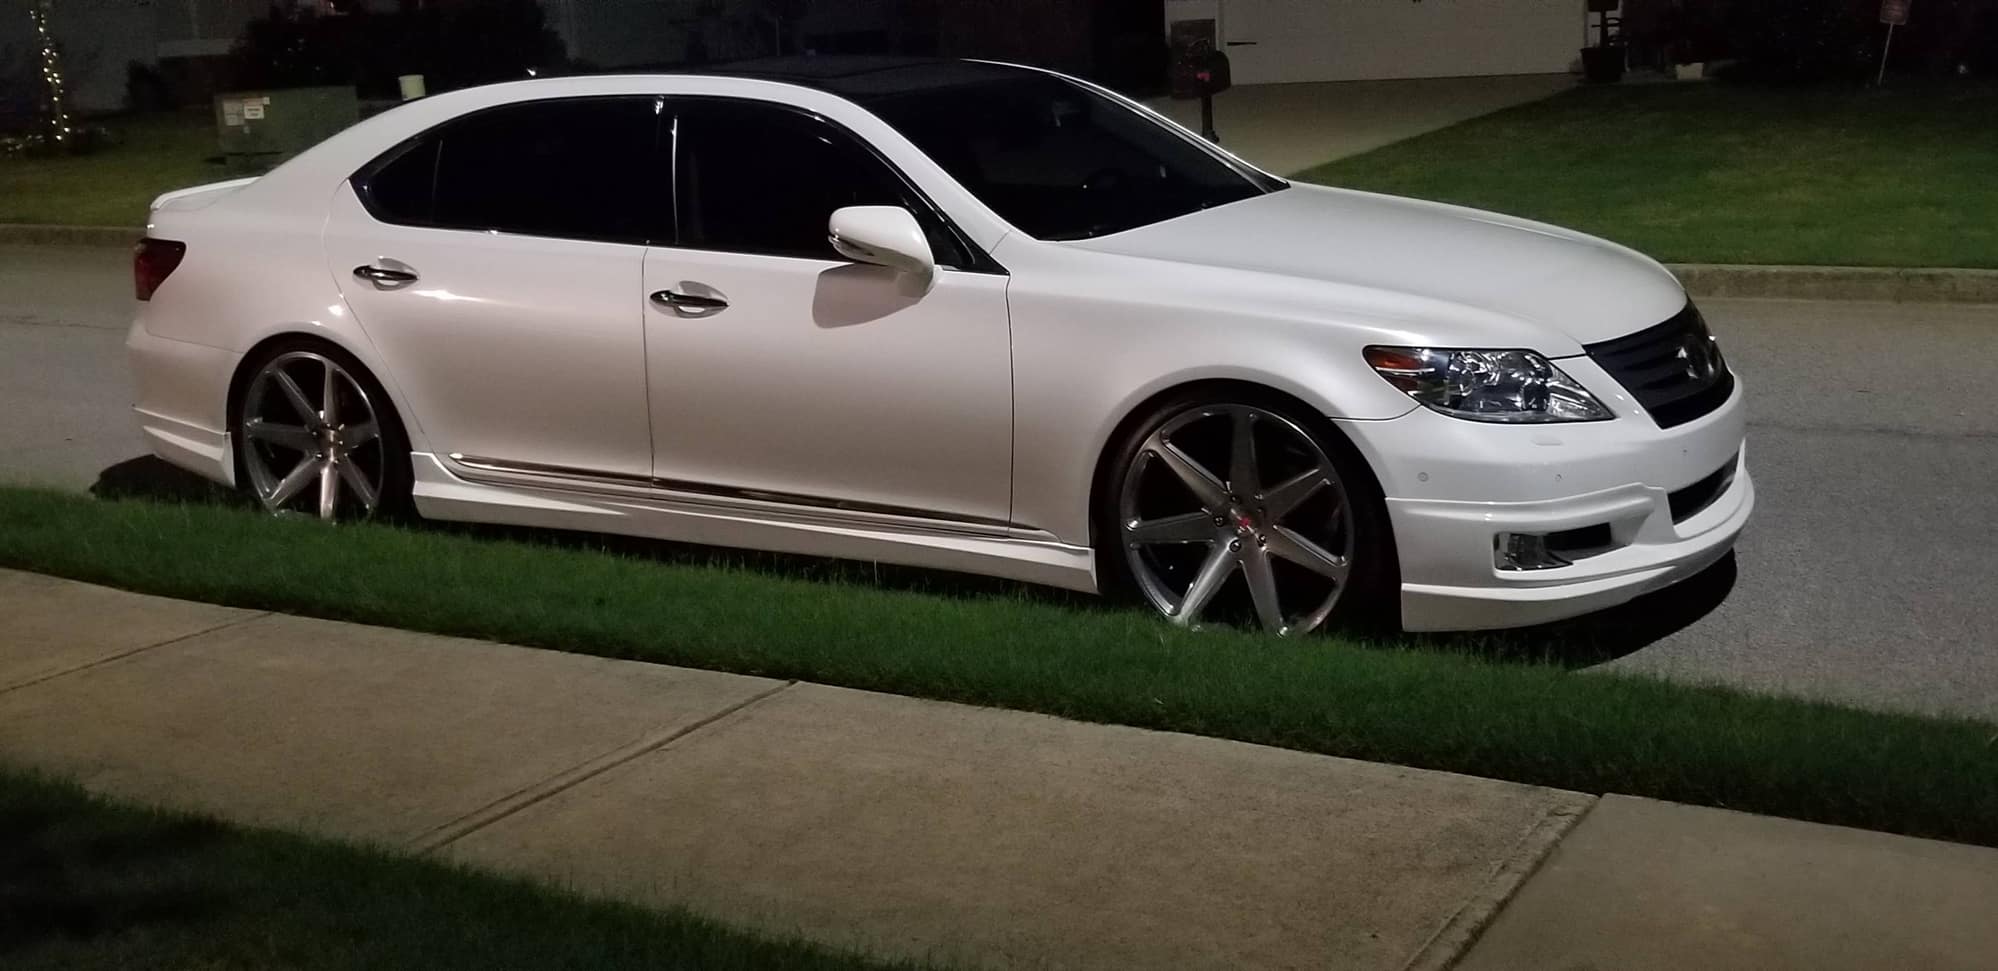 Wheels and Tires/Axles - FS: Vossen CG-207 Forged Wheels 22x9.5/22x11 w/tires - Used - 2007 to 2017 Lexus LS460 - 2018 to 2021 Lexus LC500 - Atlanta, GA 30128, United States